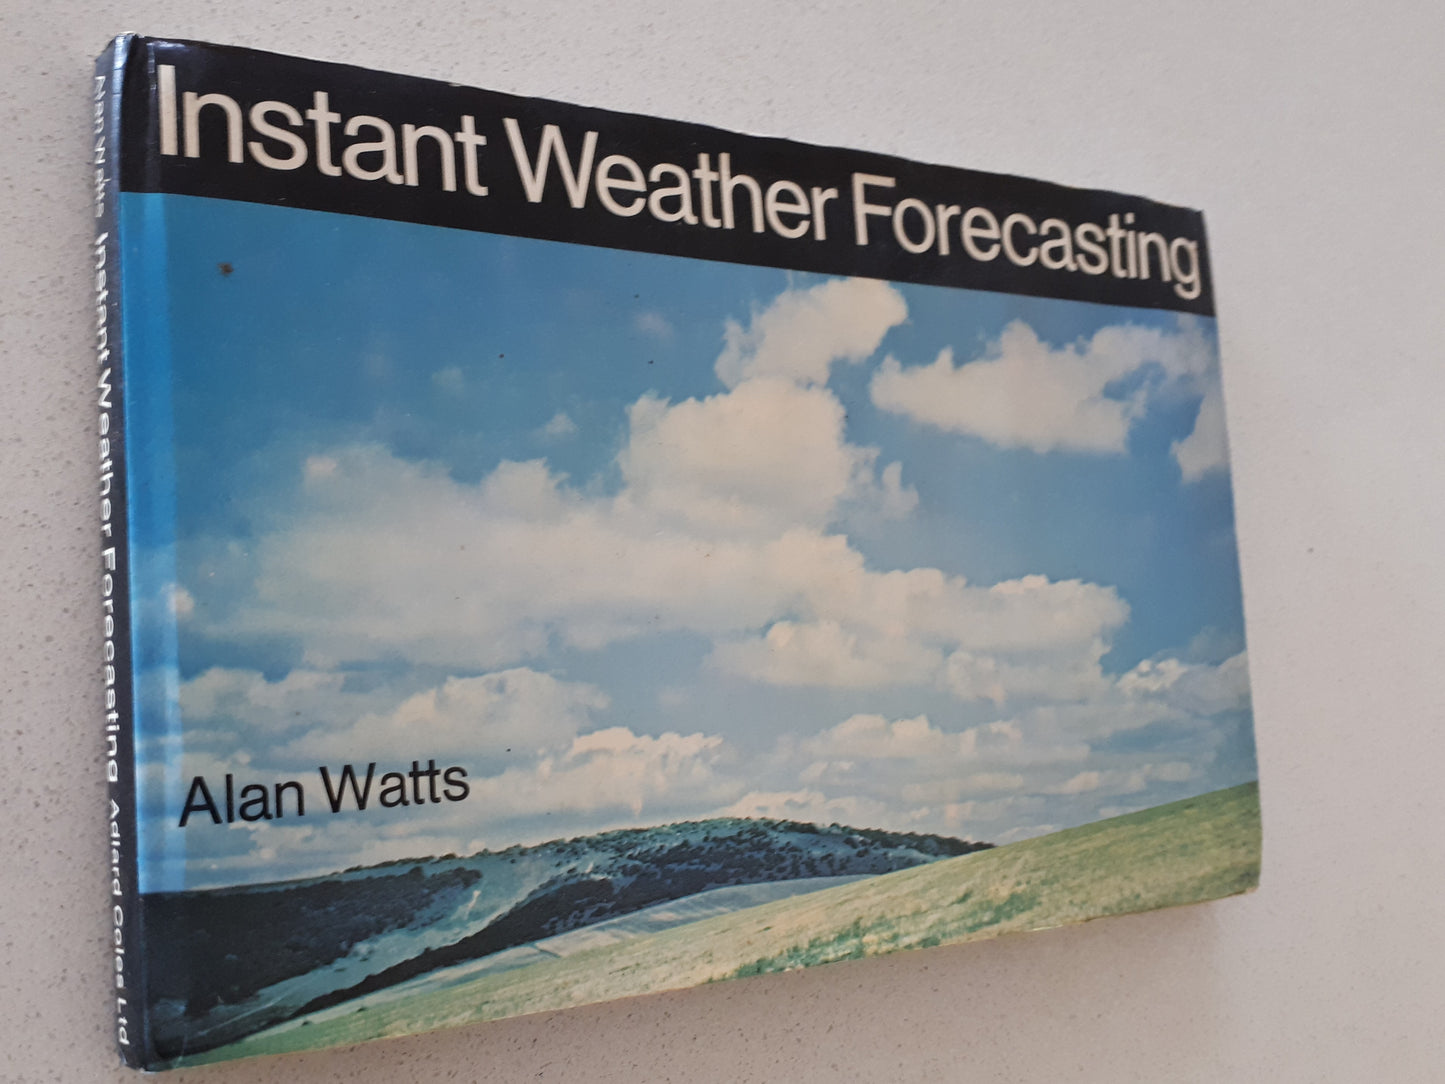 Instant Weather Forecasting by Alan Watts